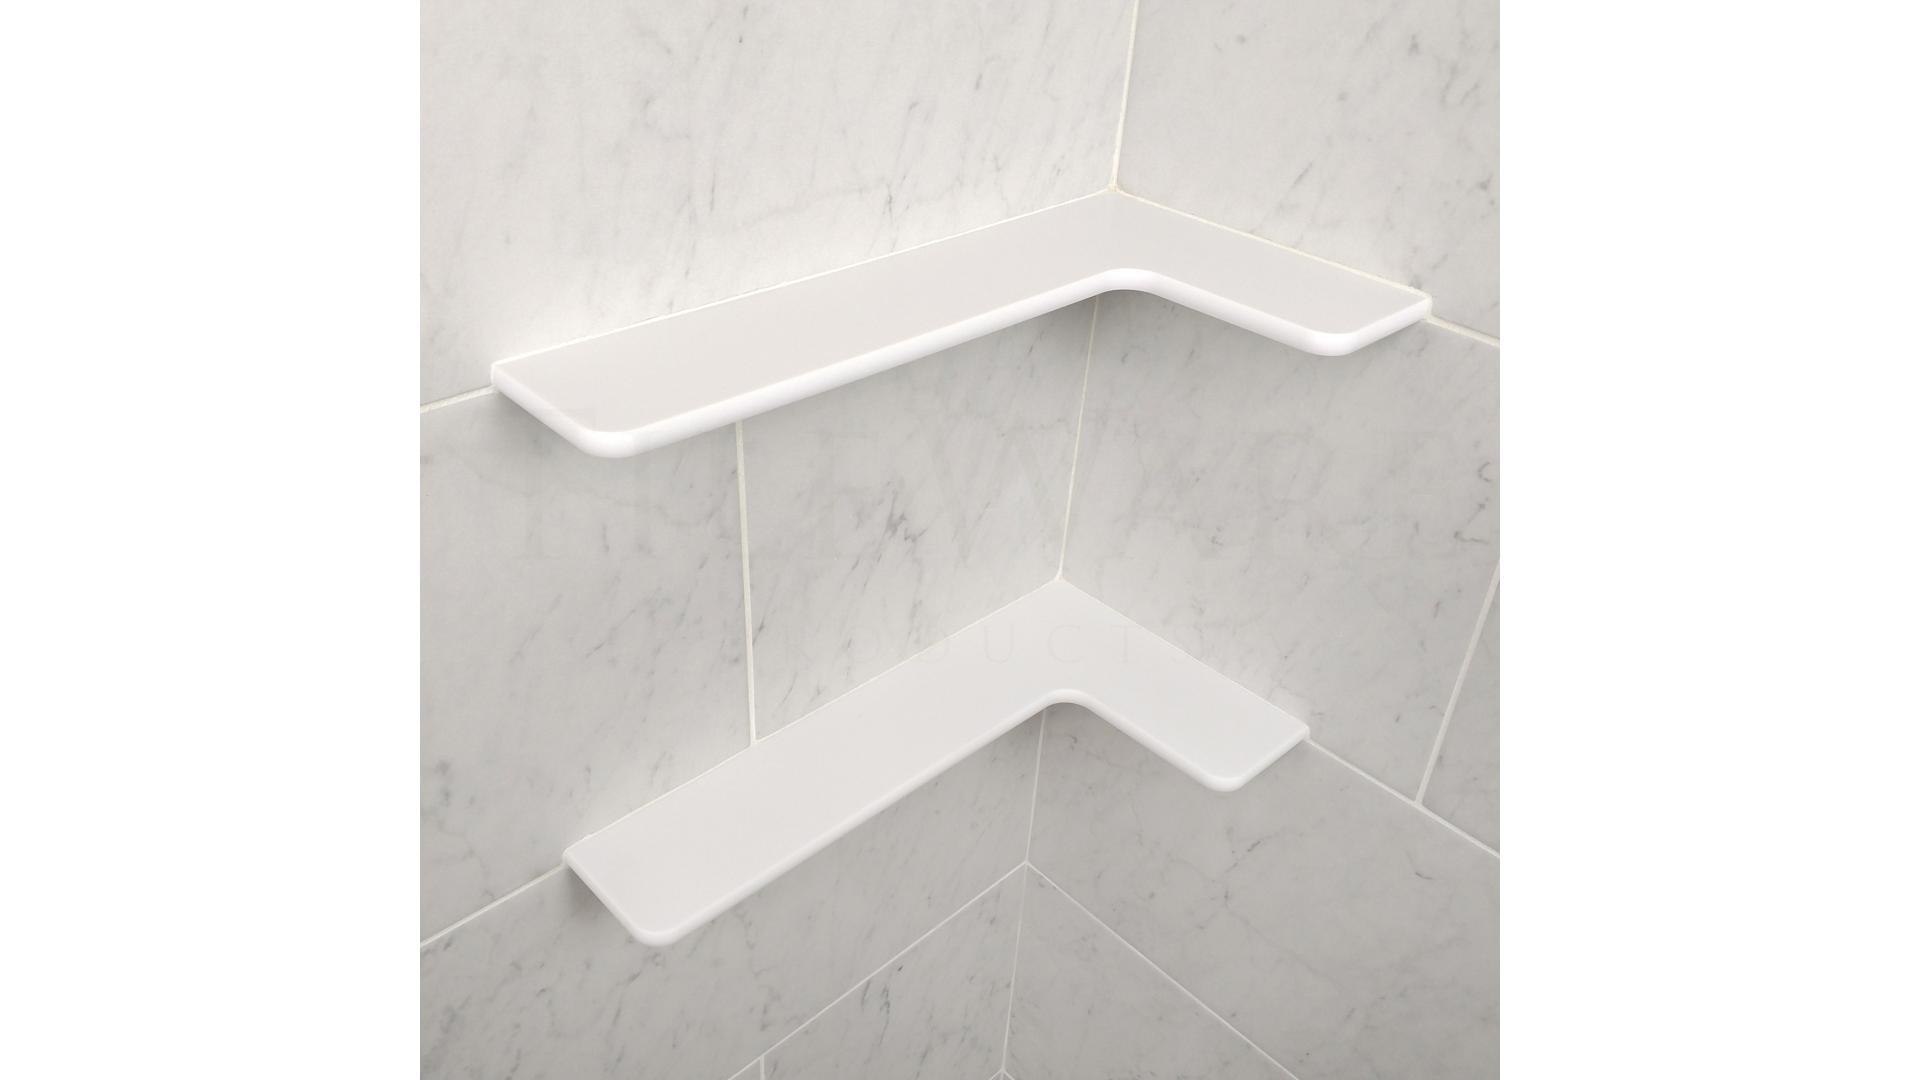 http://www.tilewareproducts.com/sites/default/files/styles/product_category_home_page/public/product-images/installationkit/img20190517131727459cropped2000x2000.jpg?itok=QMLMnOCw